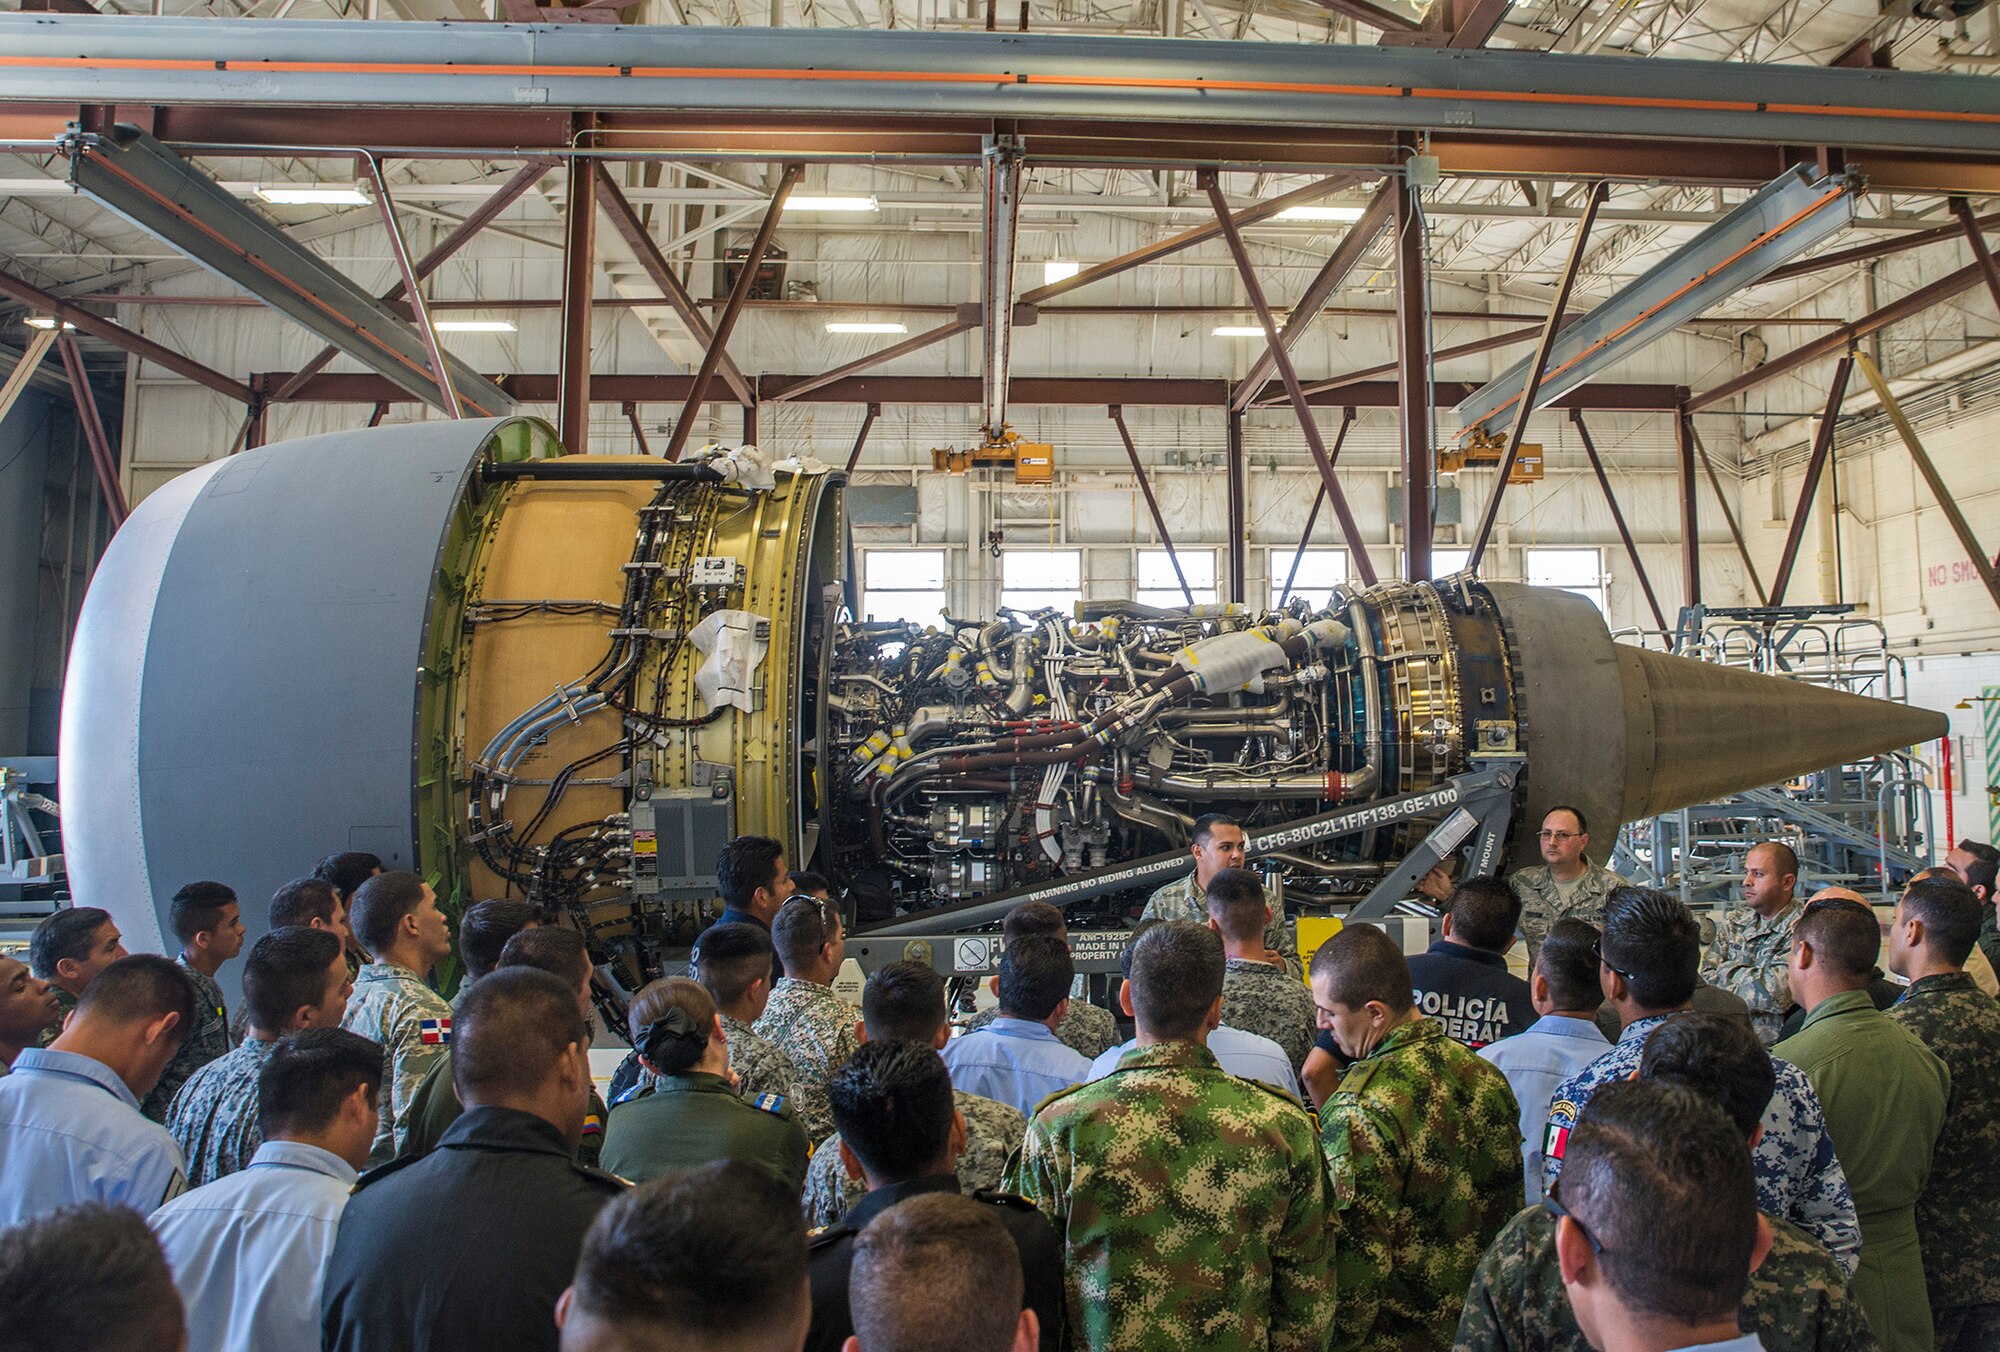 Students from the  Inter-American Air Forces Academy visited the 433rd Maintenance Squadron engine shop  March 29, 2017 at Joint Base San Antonio-Lackland, Texas. As part of their tour the students toured a C-5M Super Galaxy aircraft and visited the structural, metals, and survival shops.  (U.S. Air Force photo by Benjamin Faske)